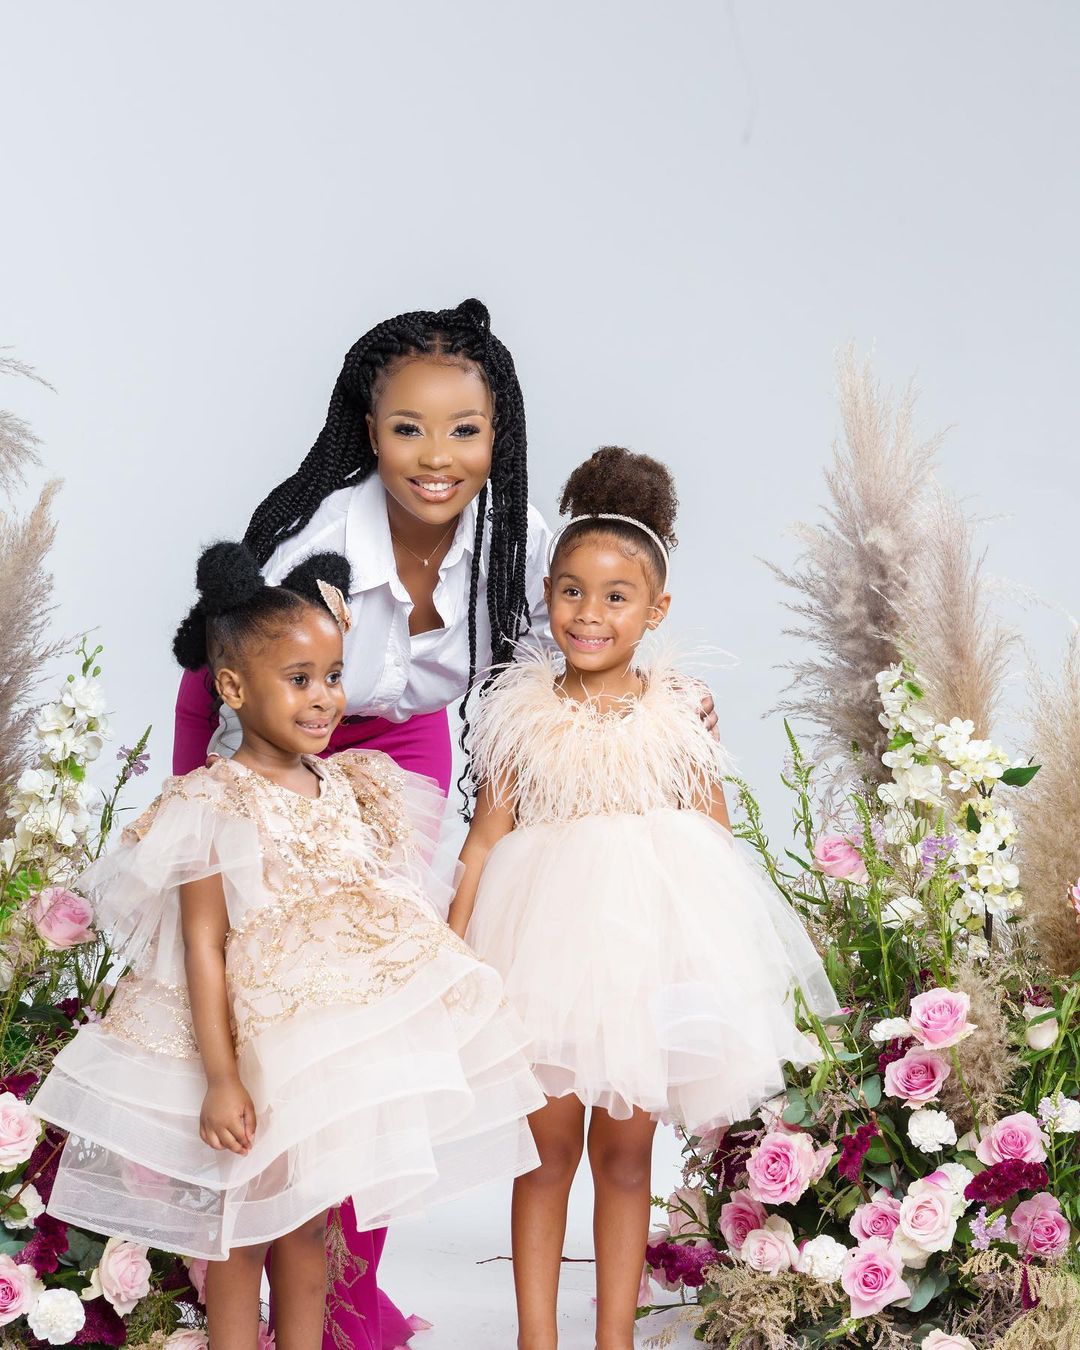 Sithelo Shozi reintroduces her baby clothing line